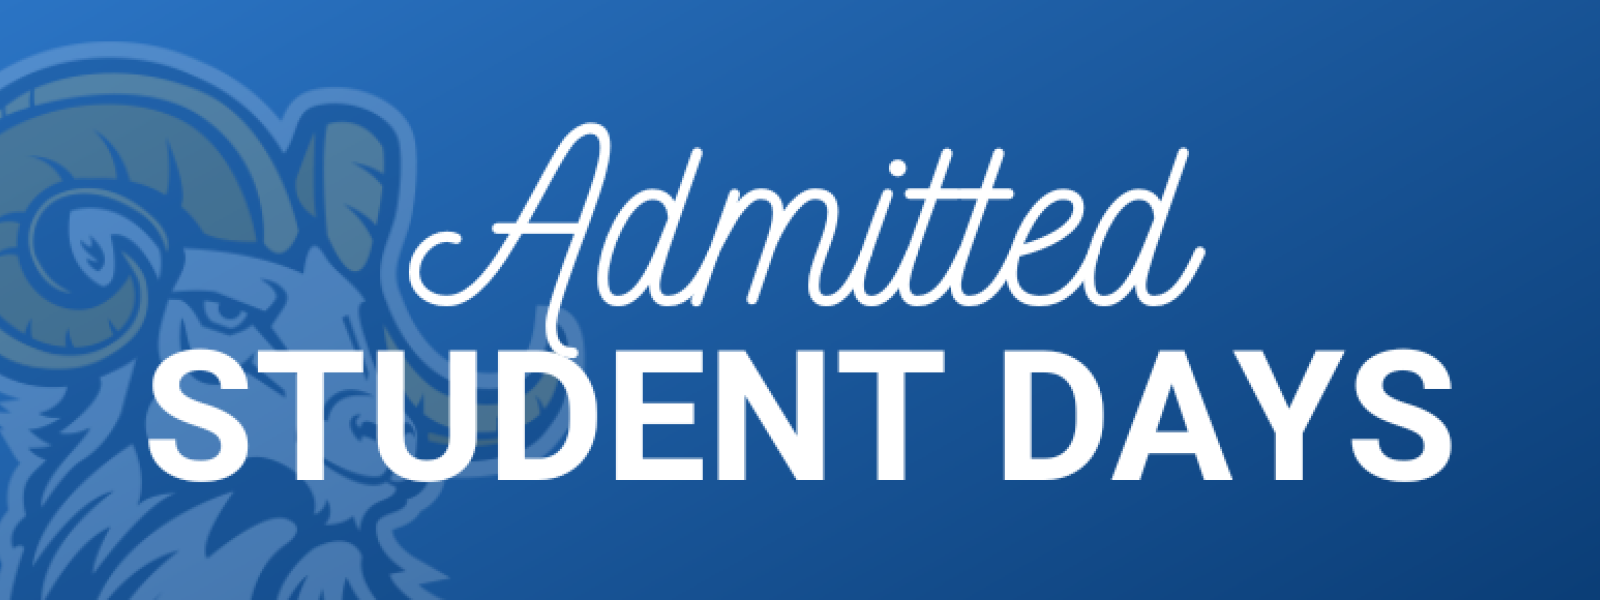 Admitted Student Days at Columbia International University